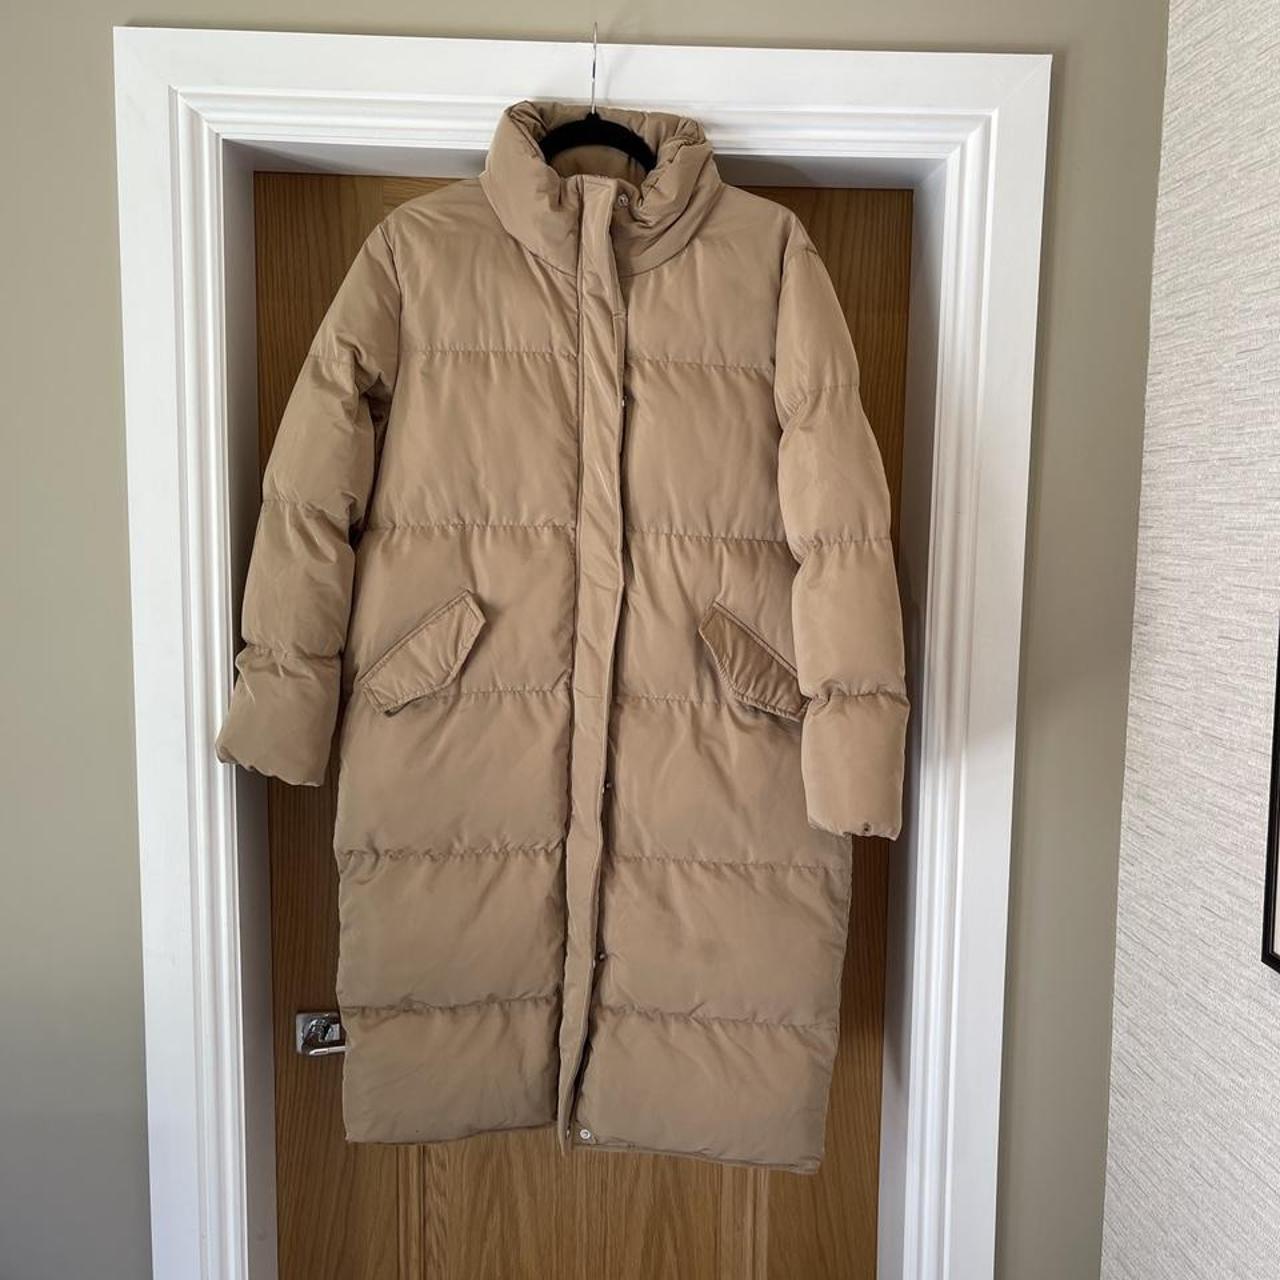 long puffer jacket. Only tried on. Size 8 - Depop